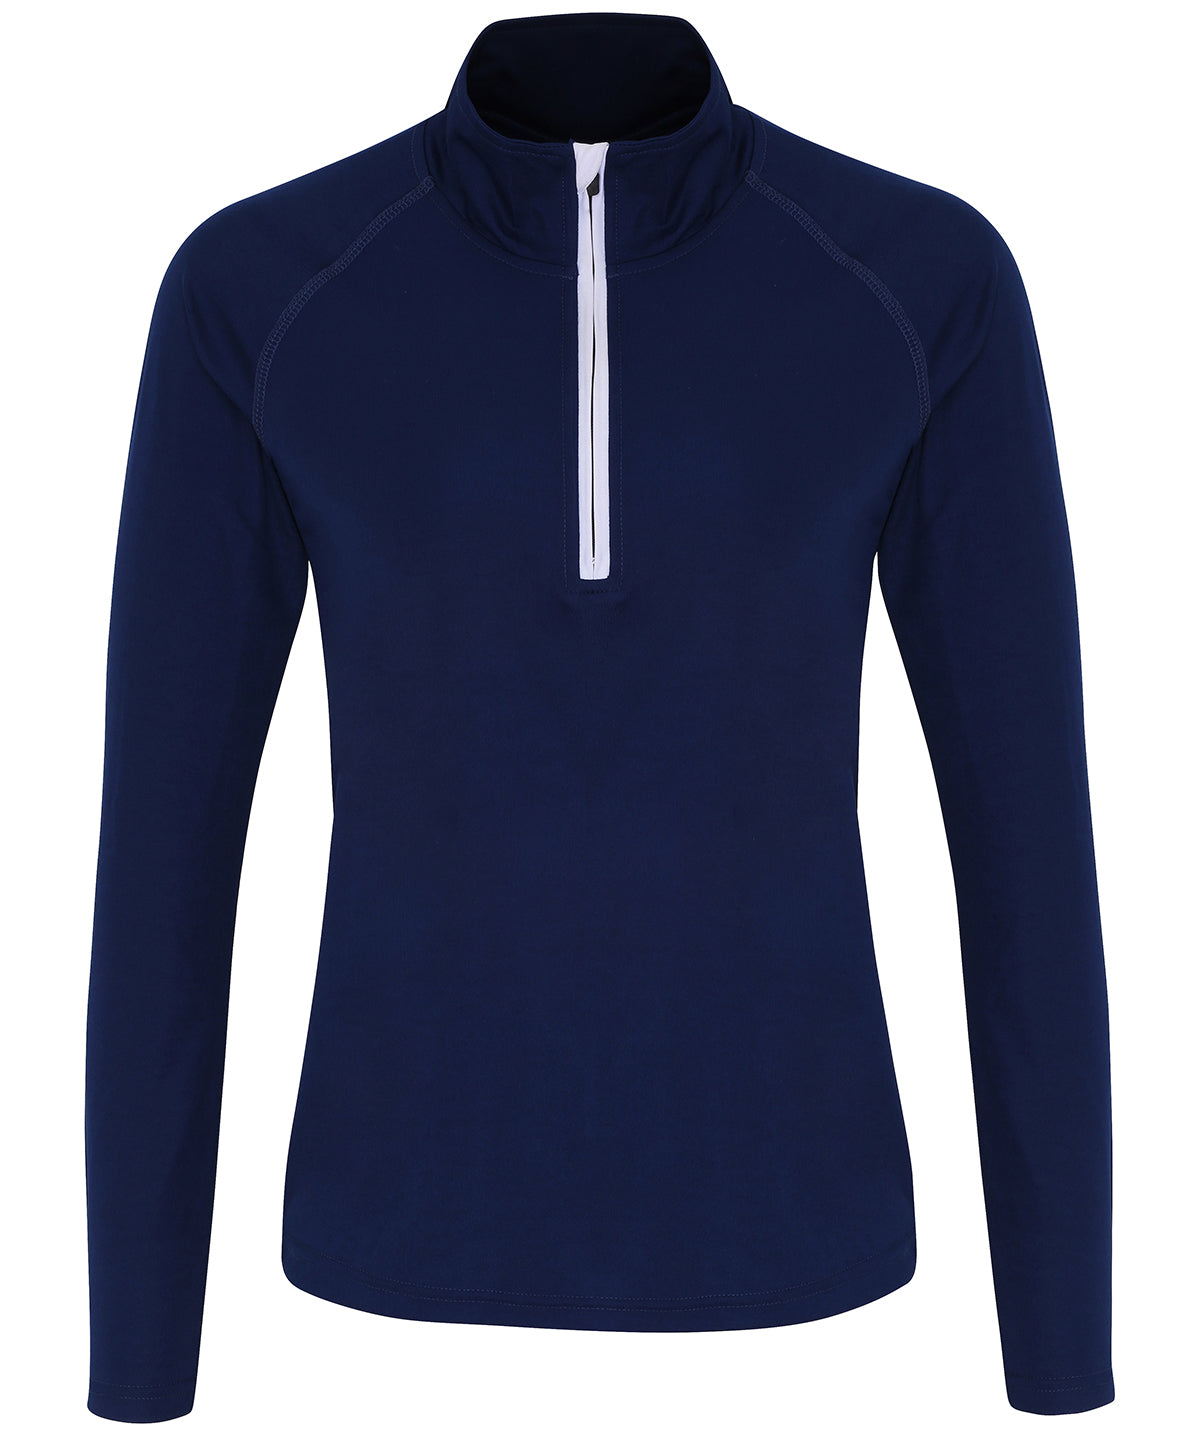 Navy/White - Women's TriDri® performance ¼ zip Sports Overtops TriDri® Activewear & Performance, Athleisurewear, Back to Fitness, Exclusives, Outdoor Sports, Rebrandable, Sports & Leisure, UPF Protection Schoolwear Centres